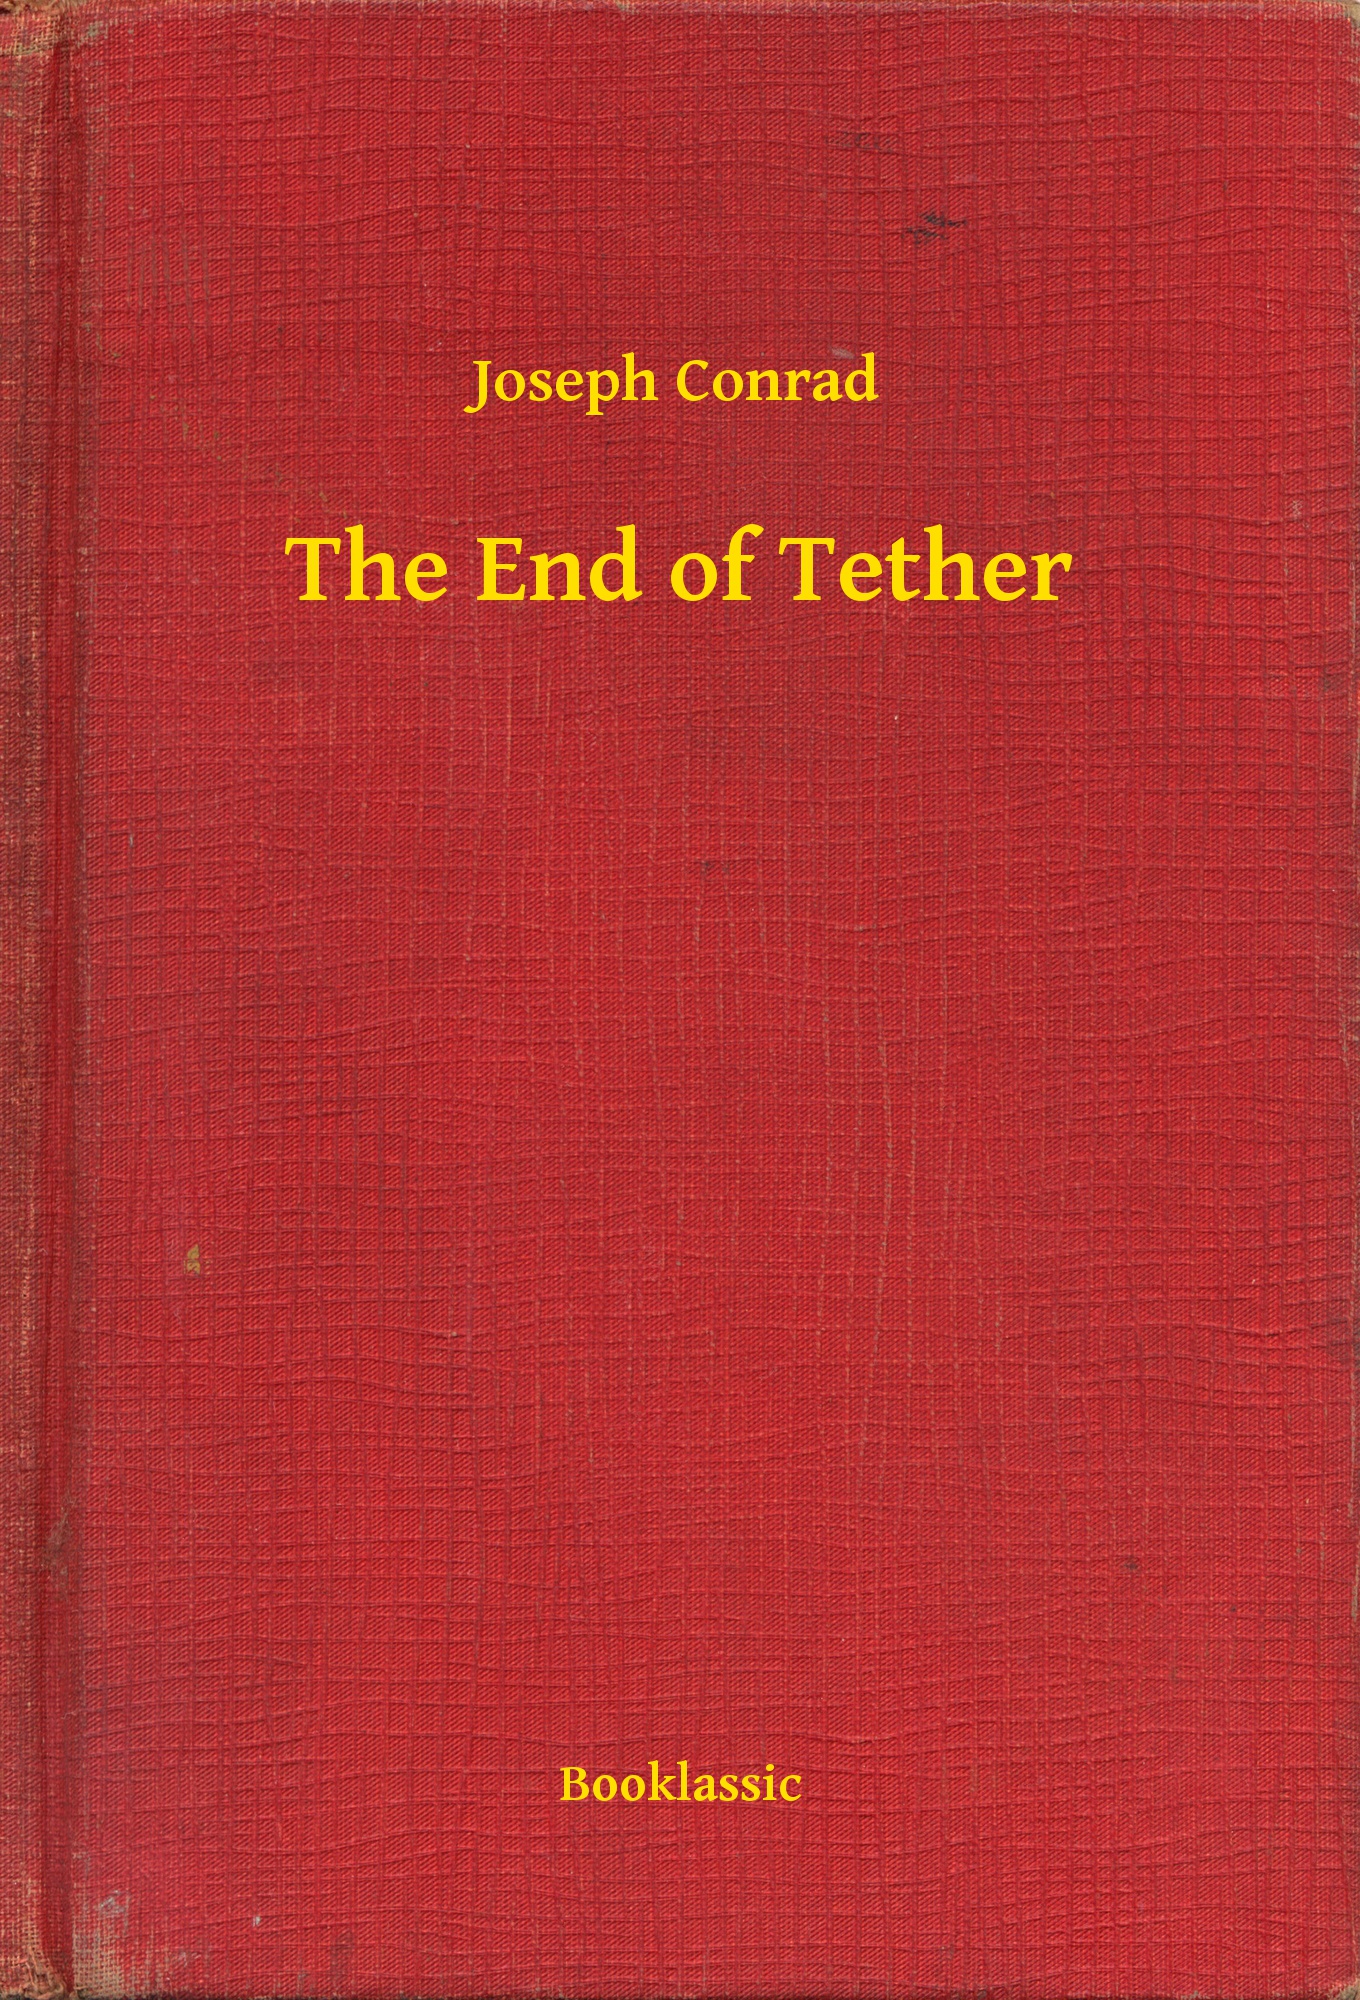 The End of Tether